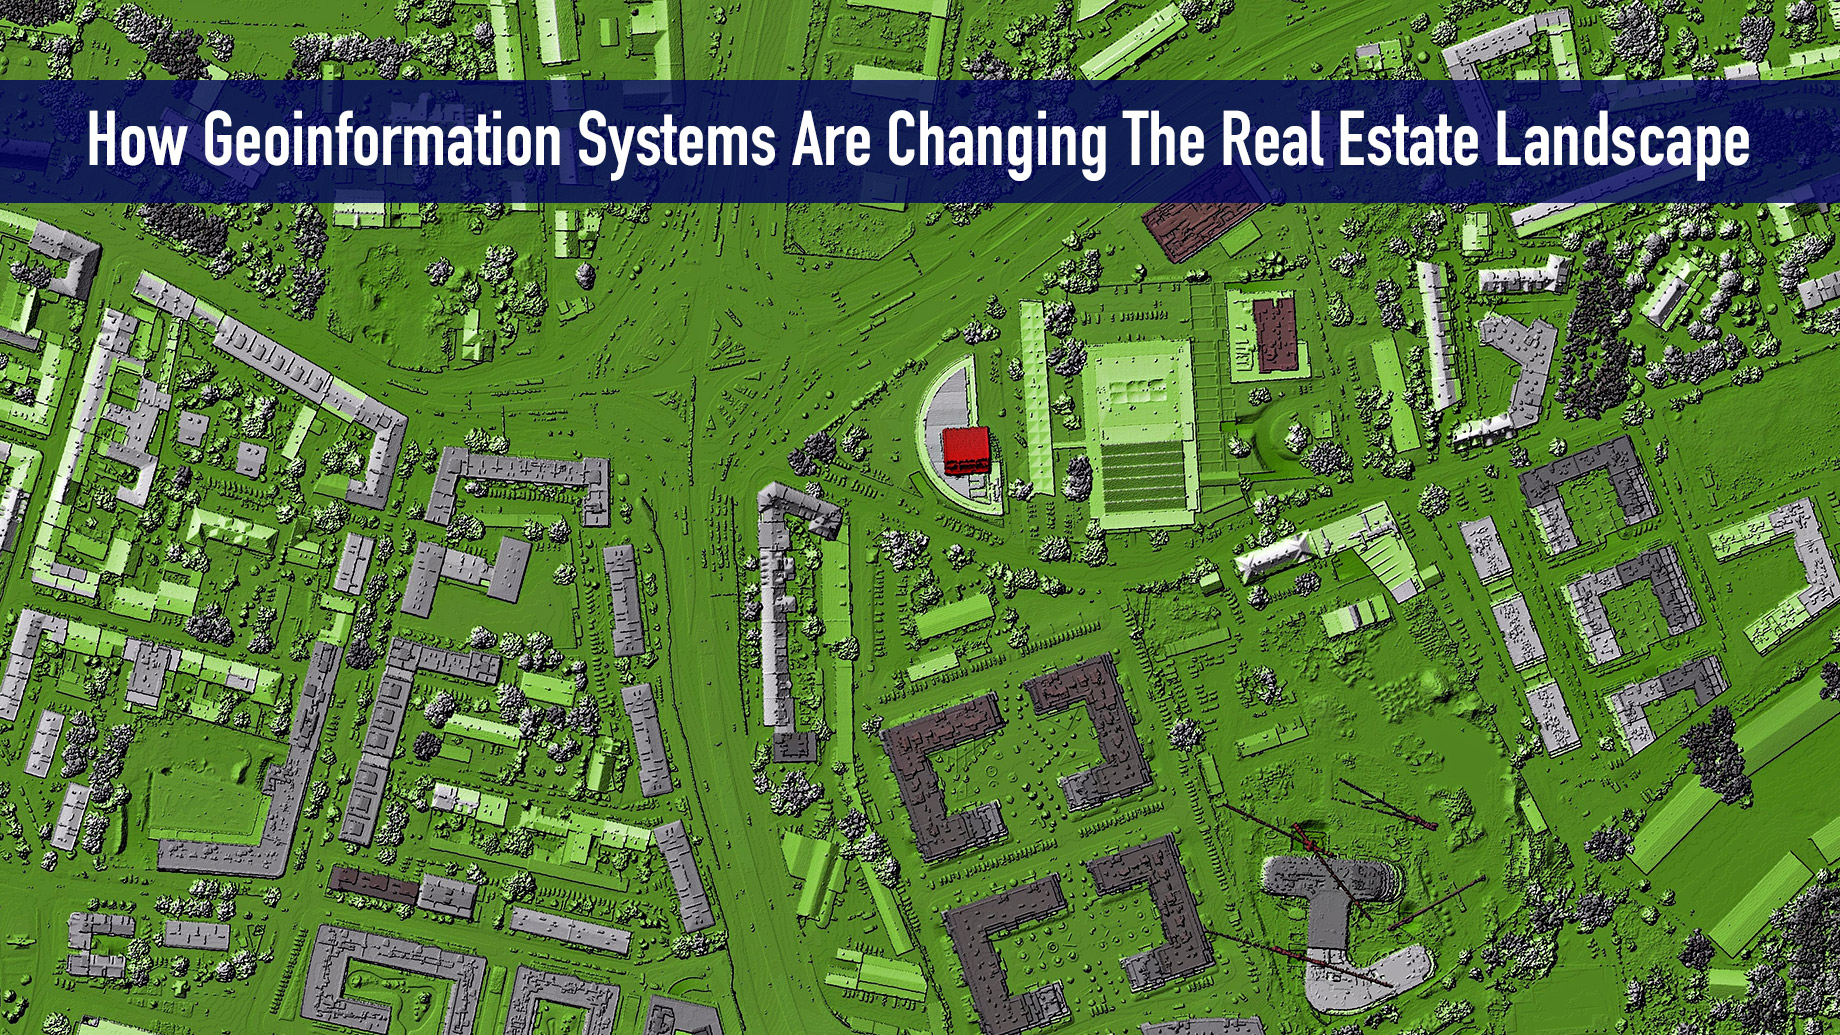 How Geoinformation Systems Are Changing The Real Estate Landscape